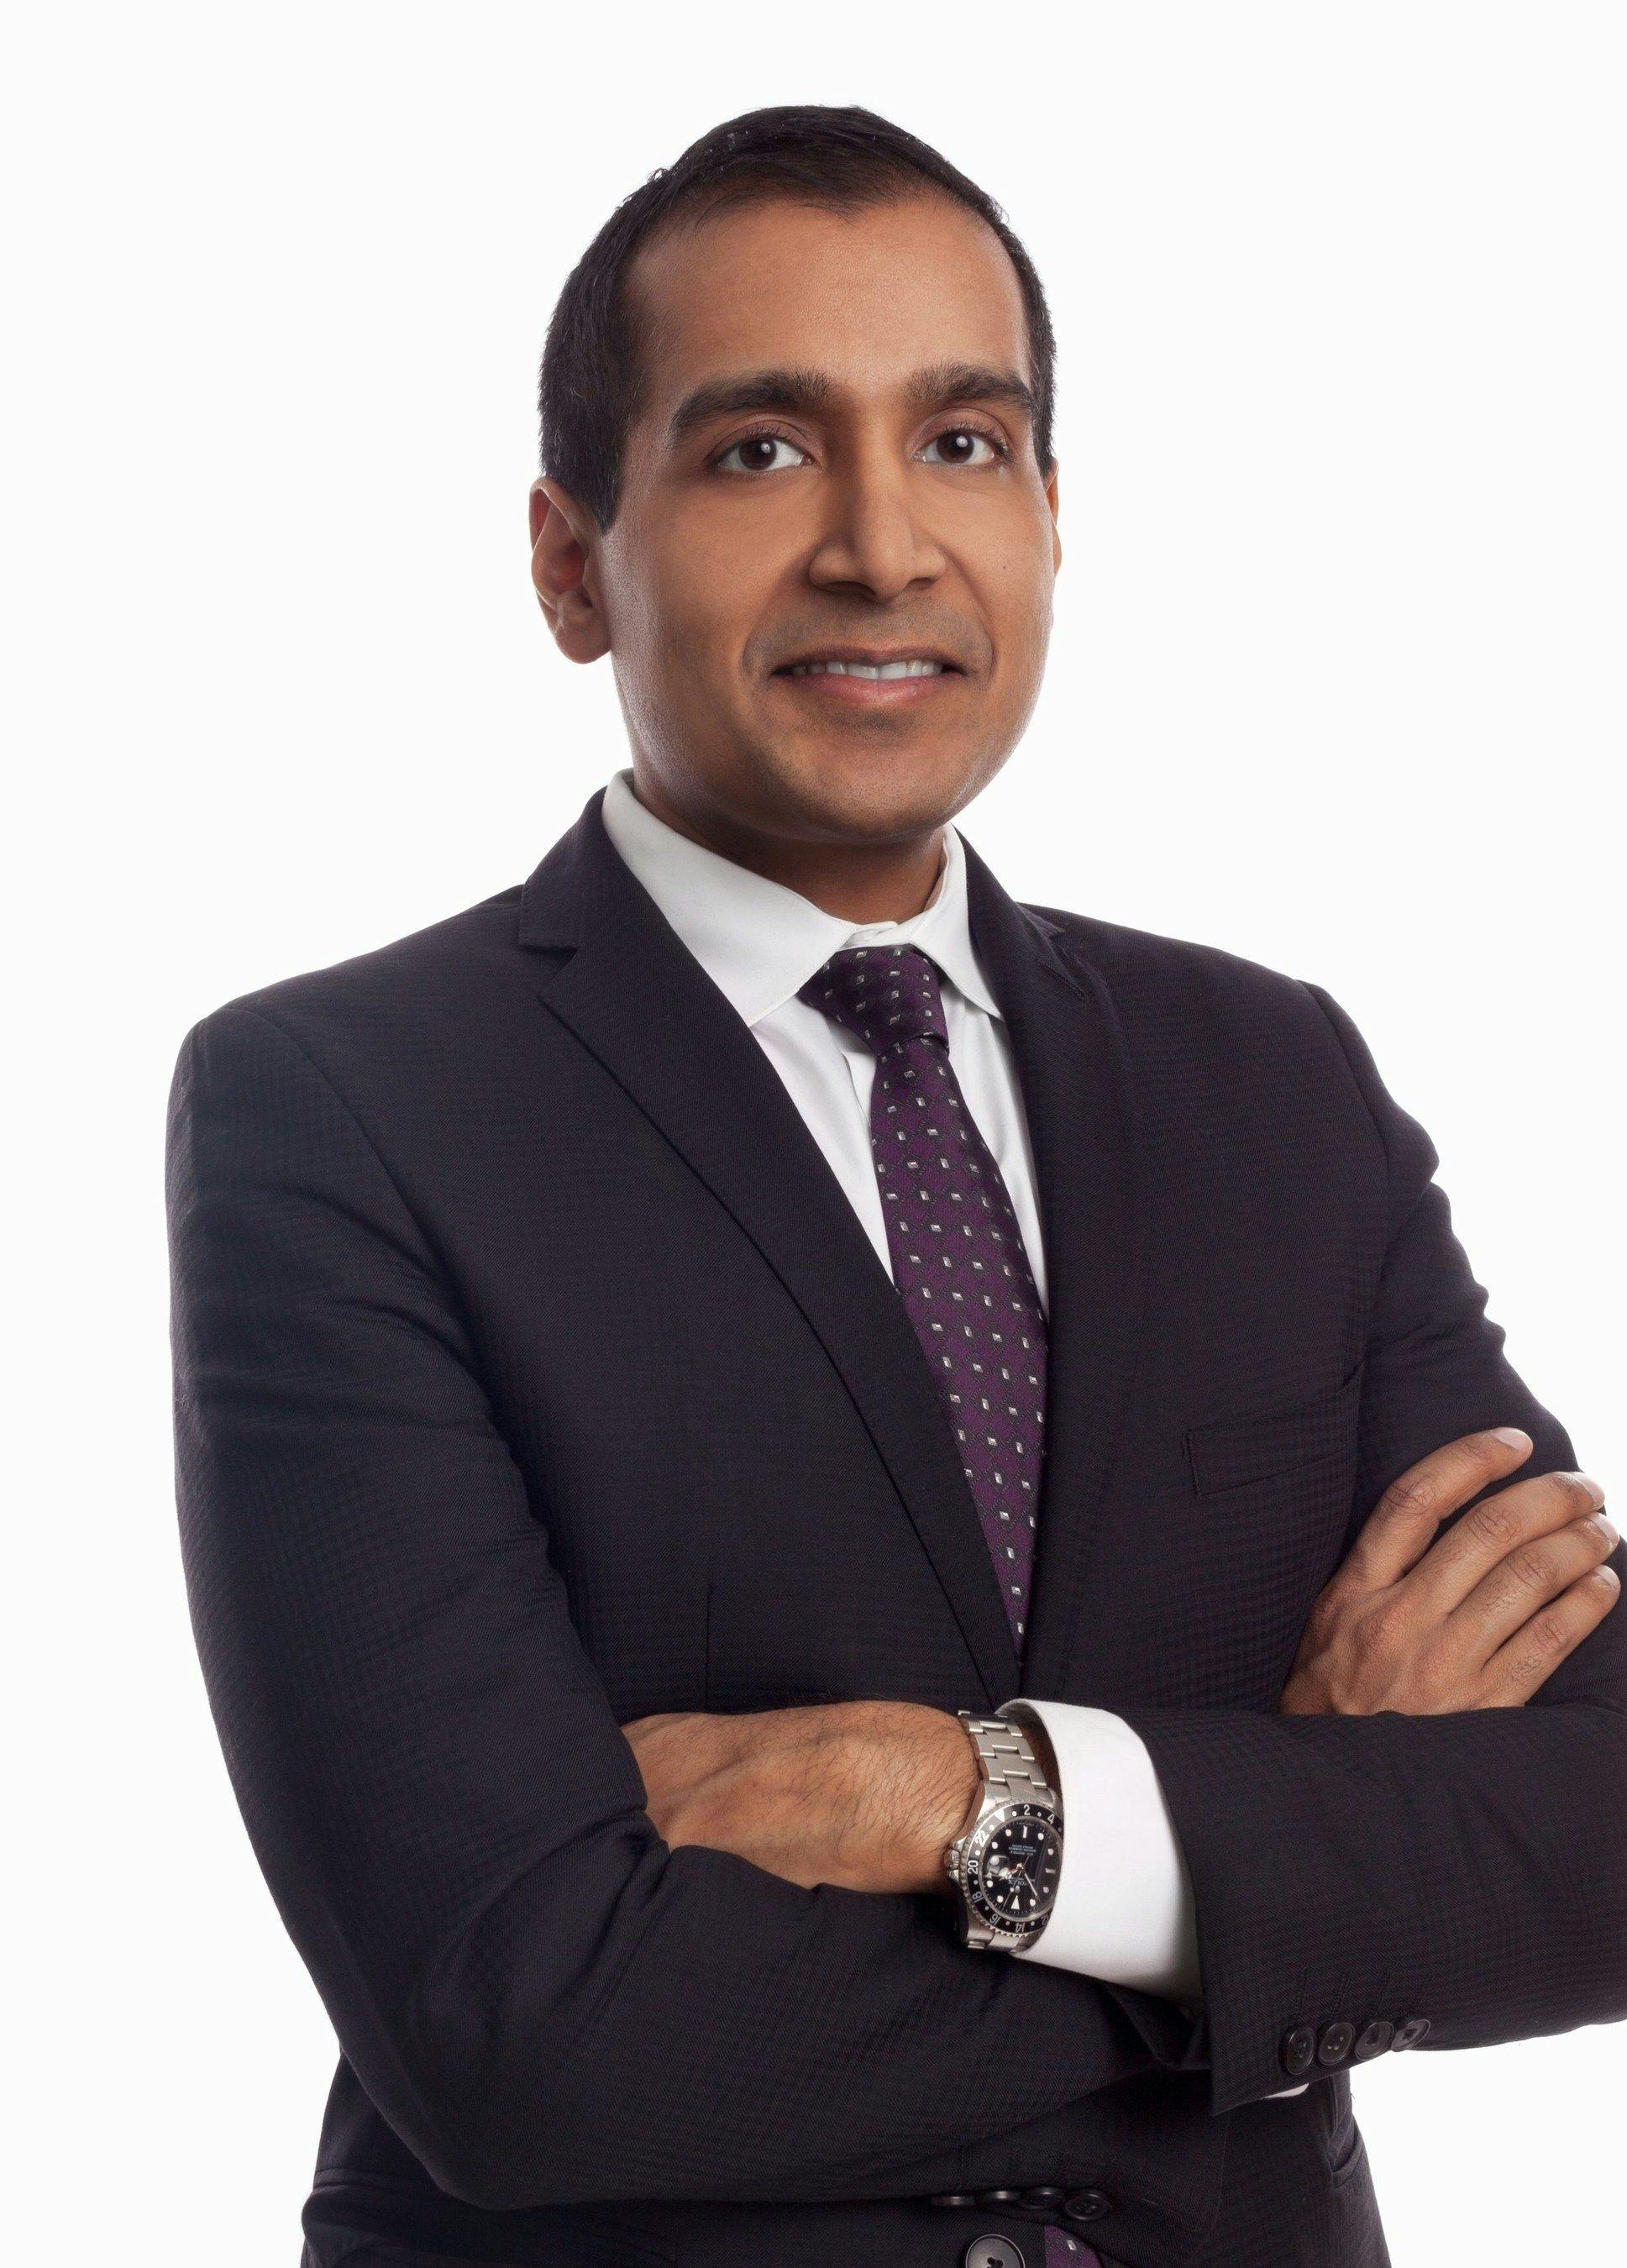 Jain Named CEO of SCAN Group and Health Plan to Drive Innovation in Care for Seniors